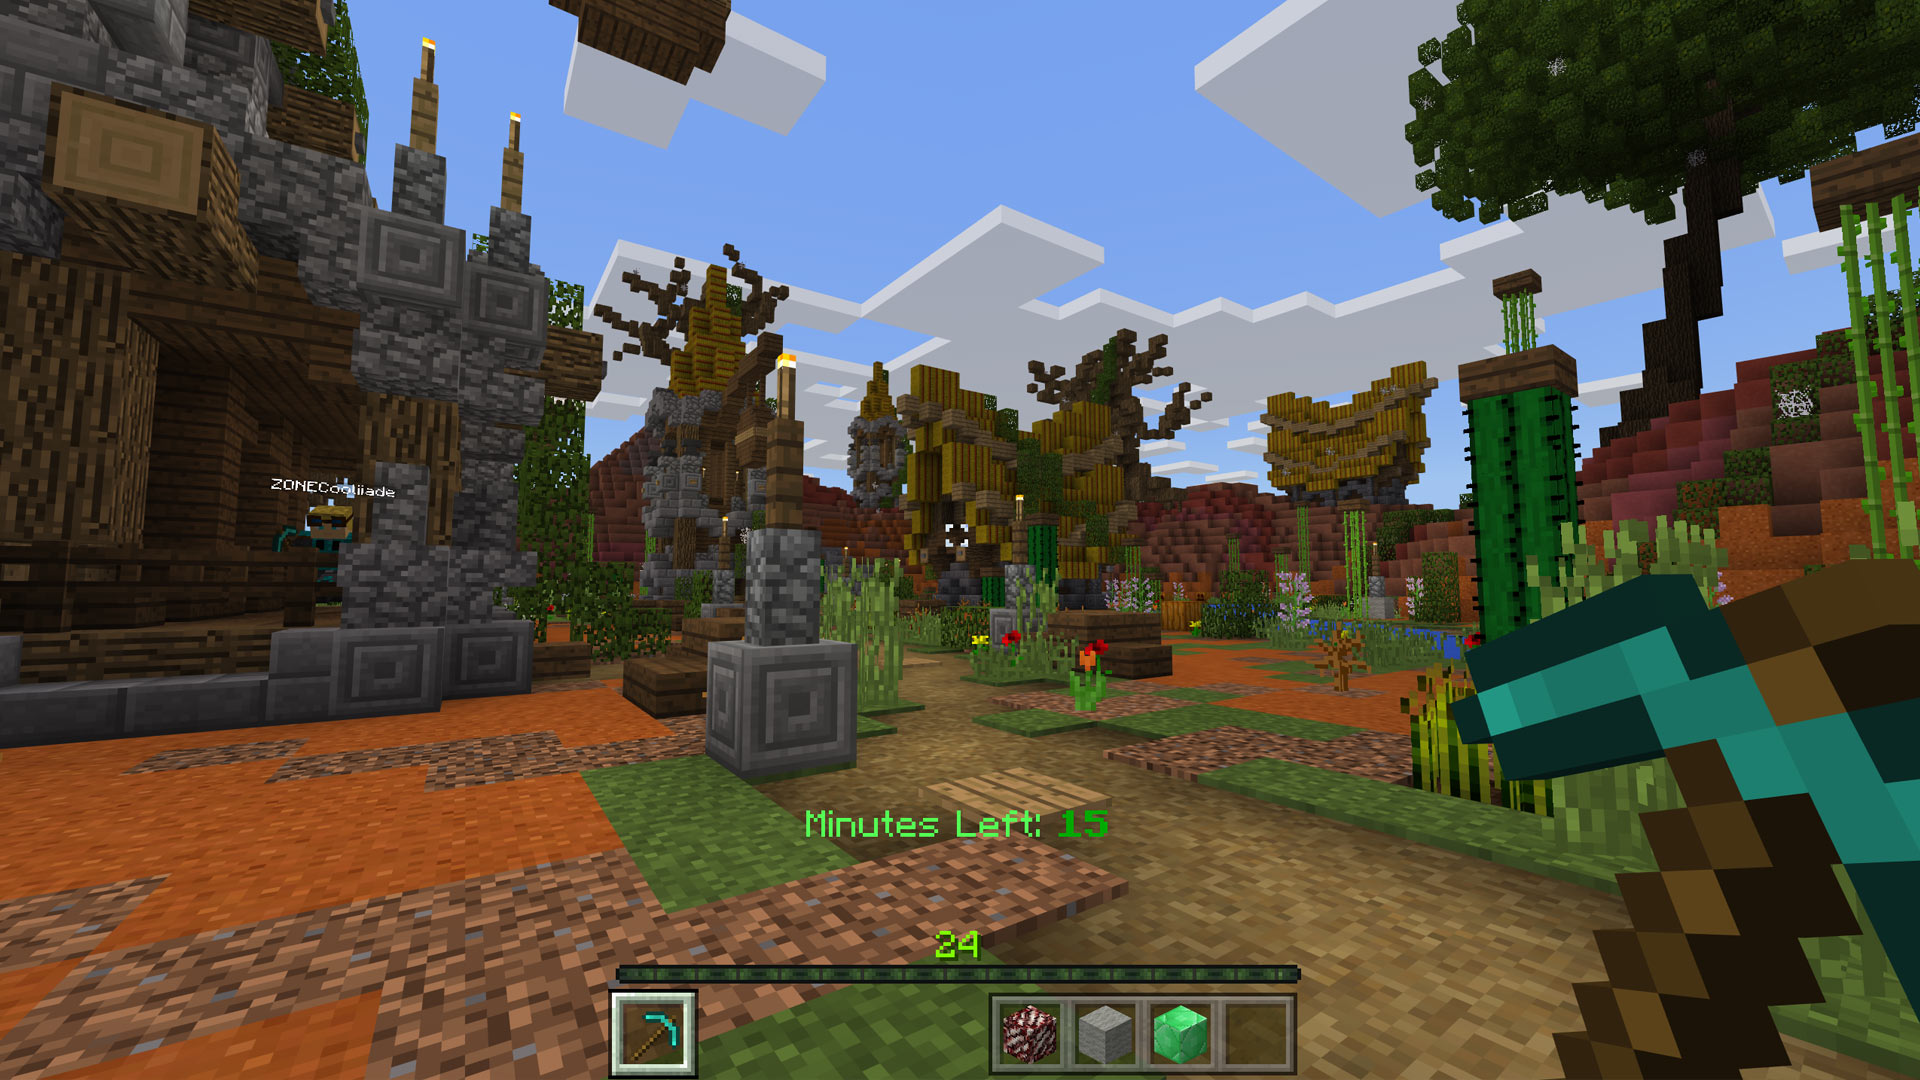 Minecraft A 30-Minute Adventure Review